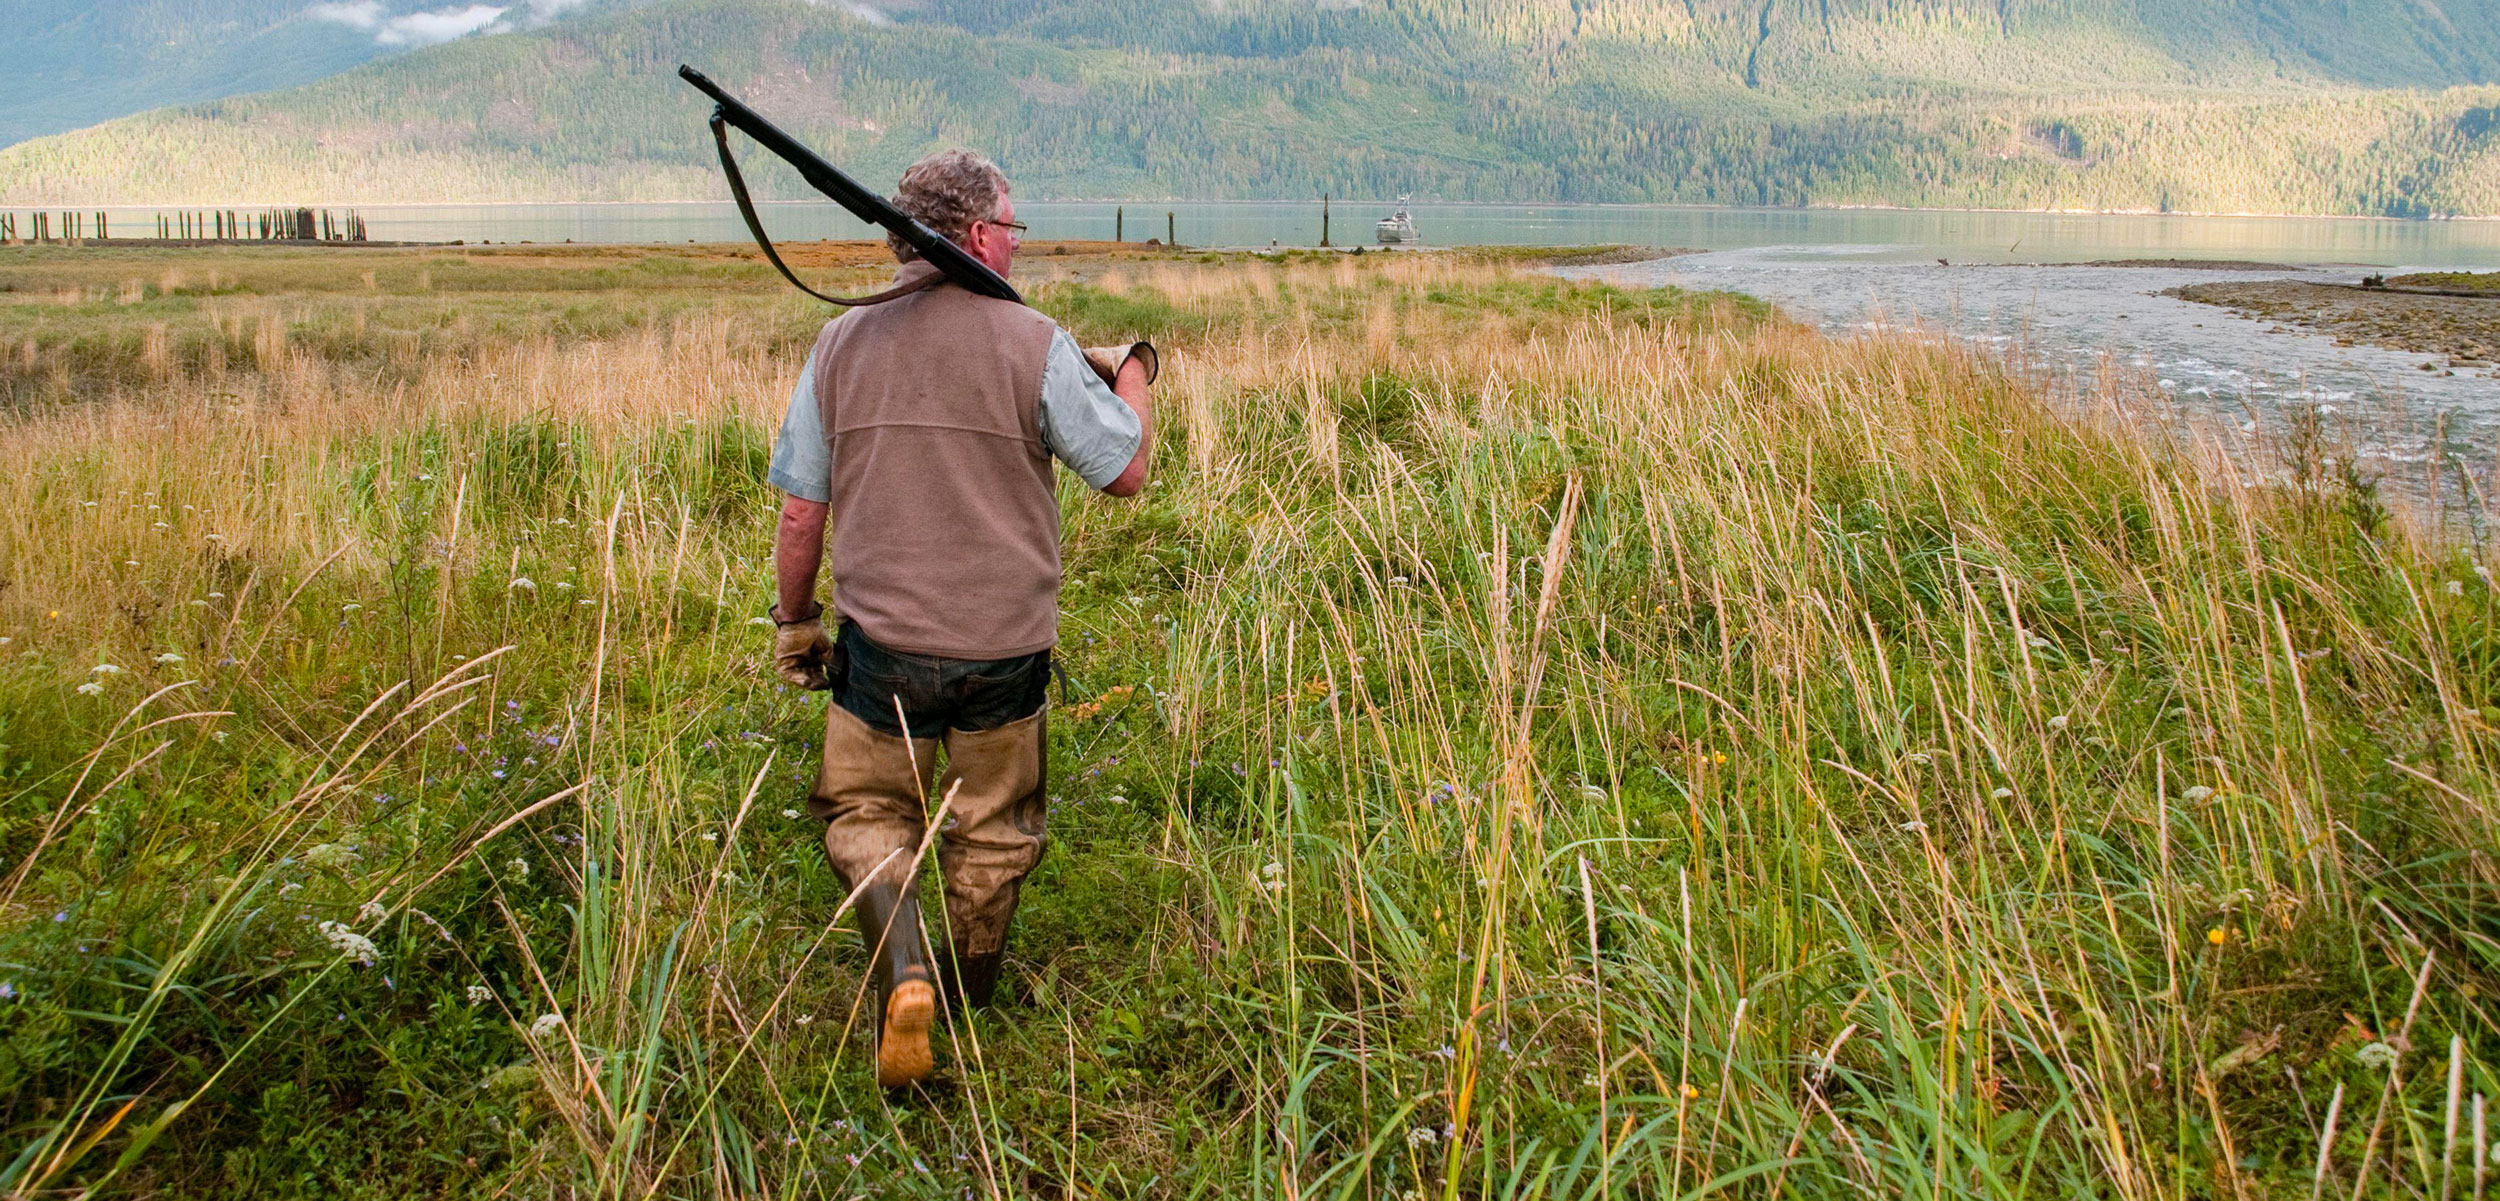 A hunter holding a shotgun and wearing fishing waders in a creek estuary in the Great Bear Rainforest